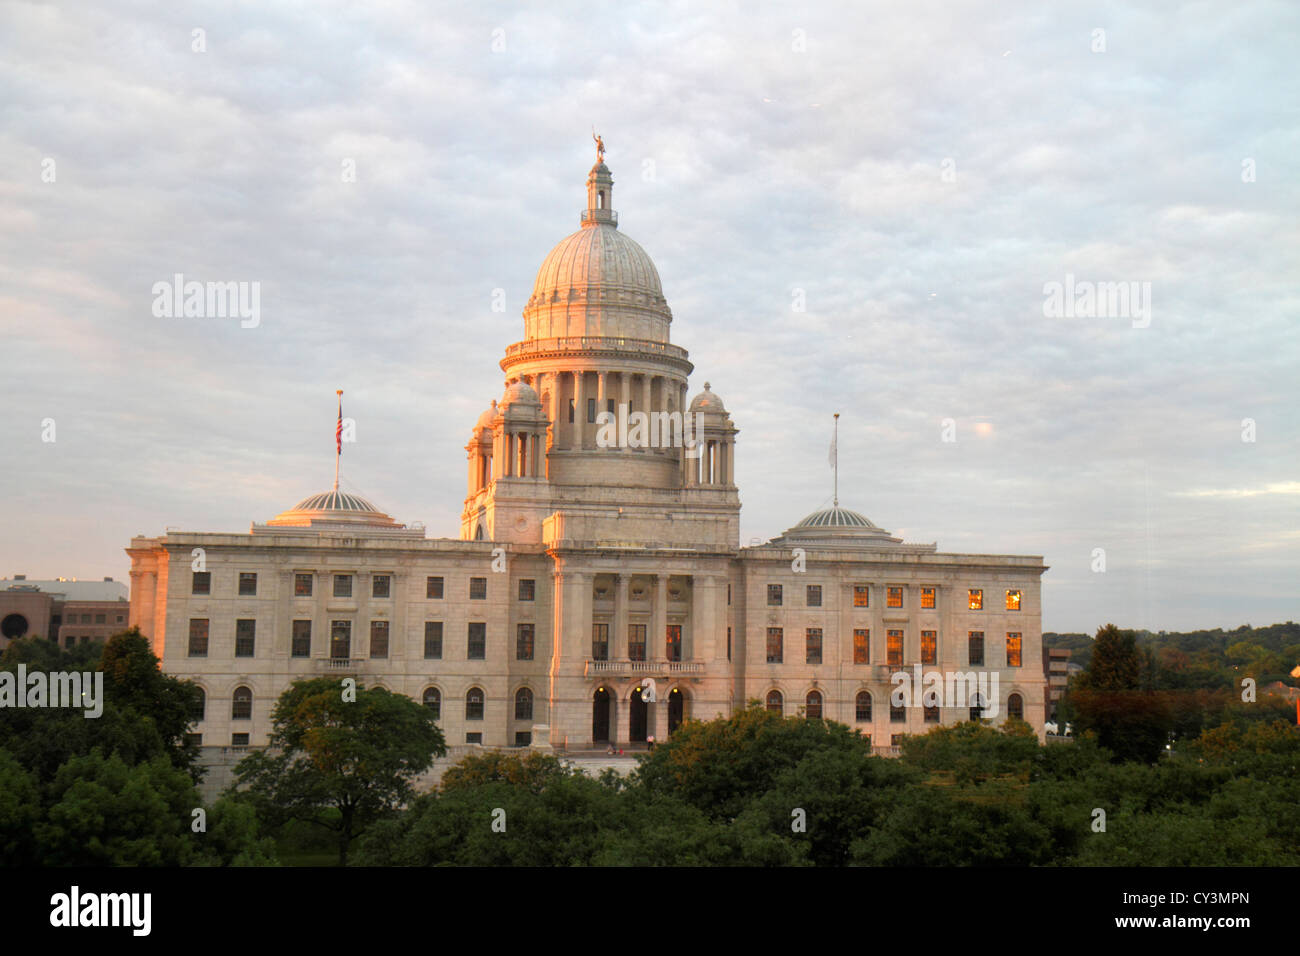 Providence Rhode Island,New England,The Rhode Island State House,neoclassical,state capitol building building,built 1904,sunset,visitors travel travel Stock Photo